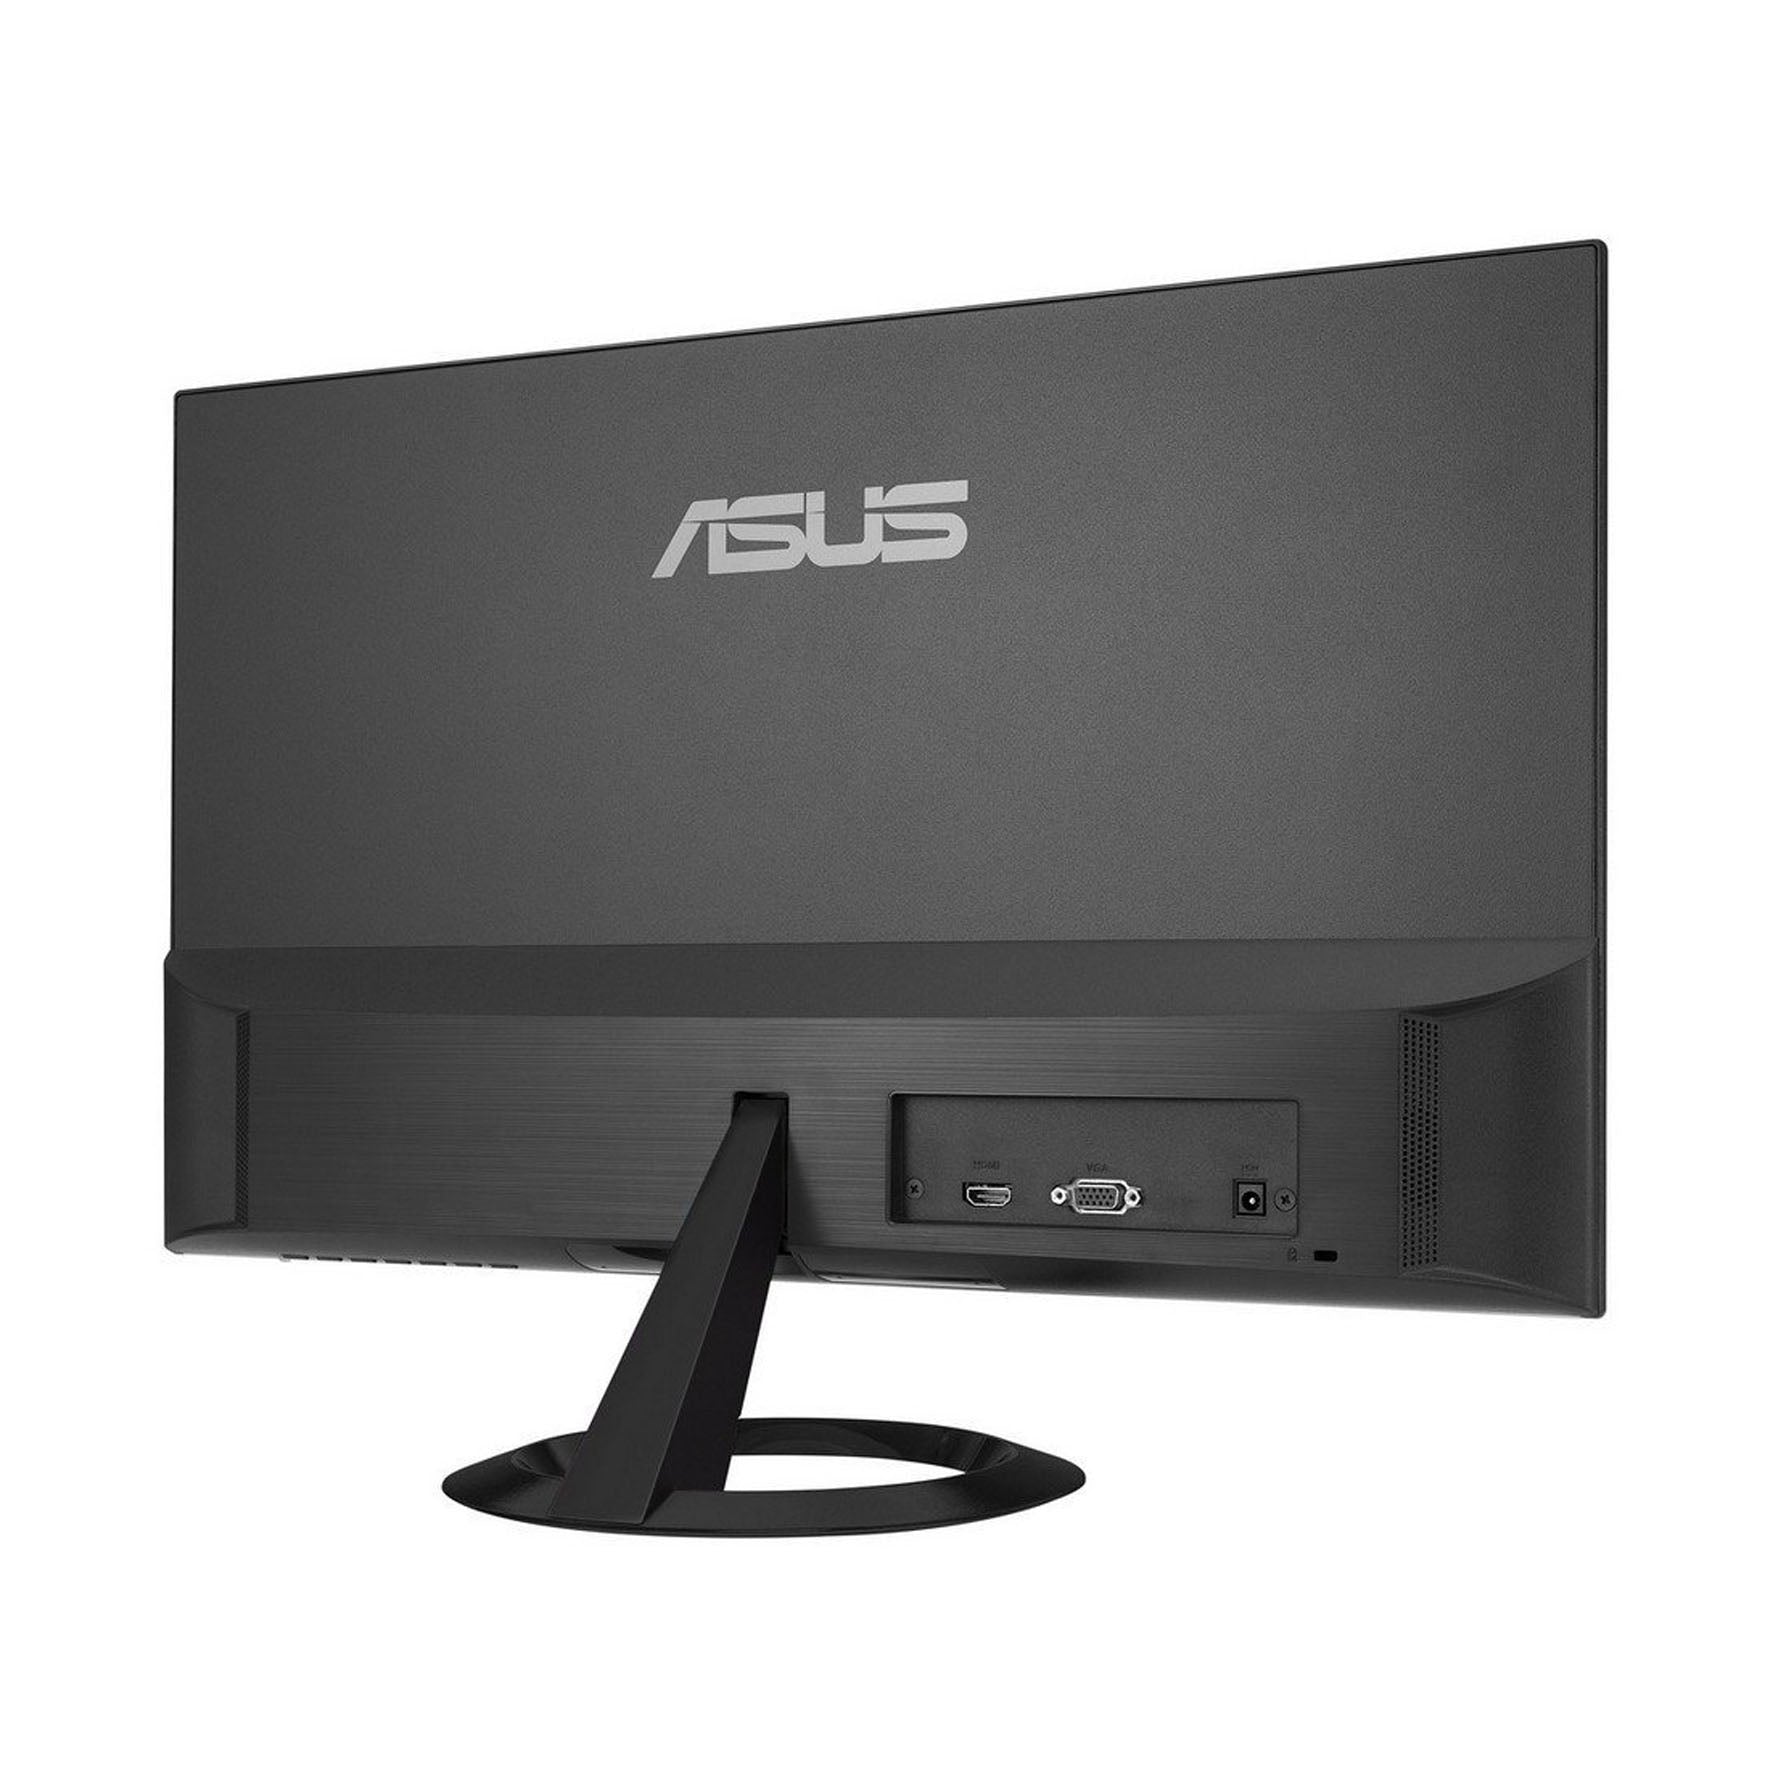 ASUS VZ229H 21.5-inch Full HD Eye Care Monitor - The Peripheral Store | TPS